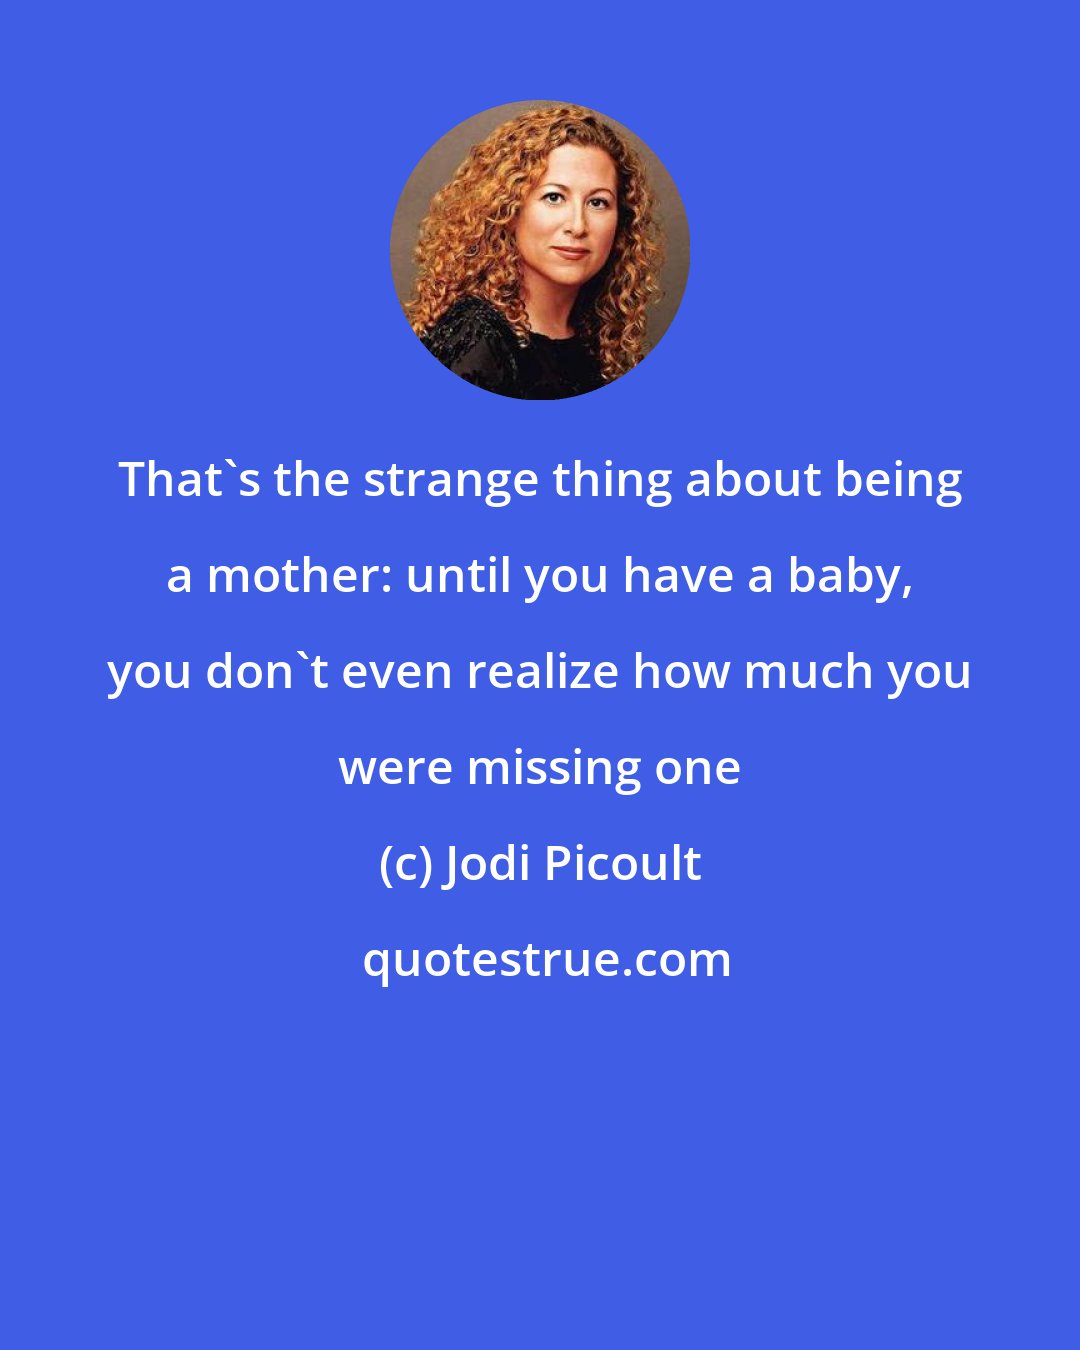 Jodi Picoult: That's the strange thing about being a mother: until you have a baby, you don't even realize how much you were missing one